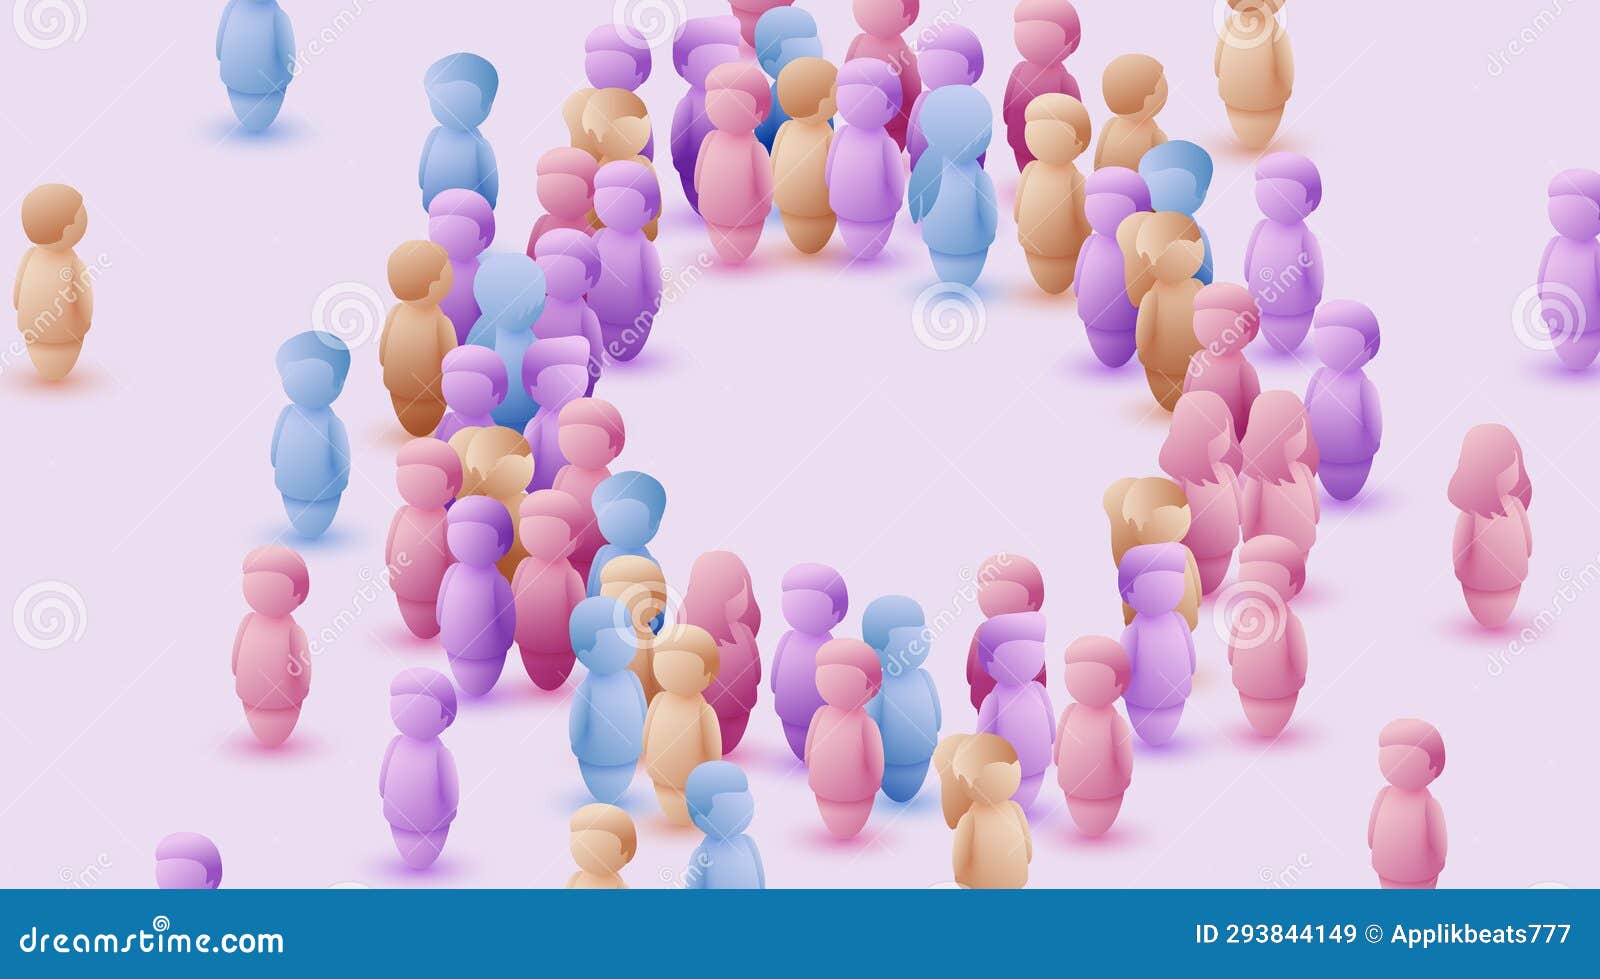 Large Group of People in the Shape of a Circle on White Background ...